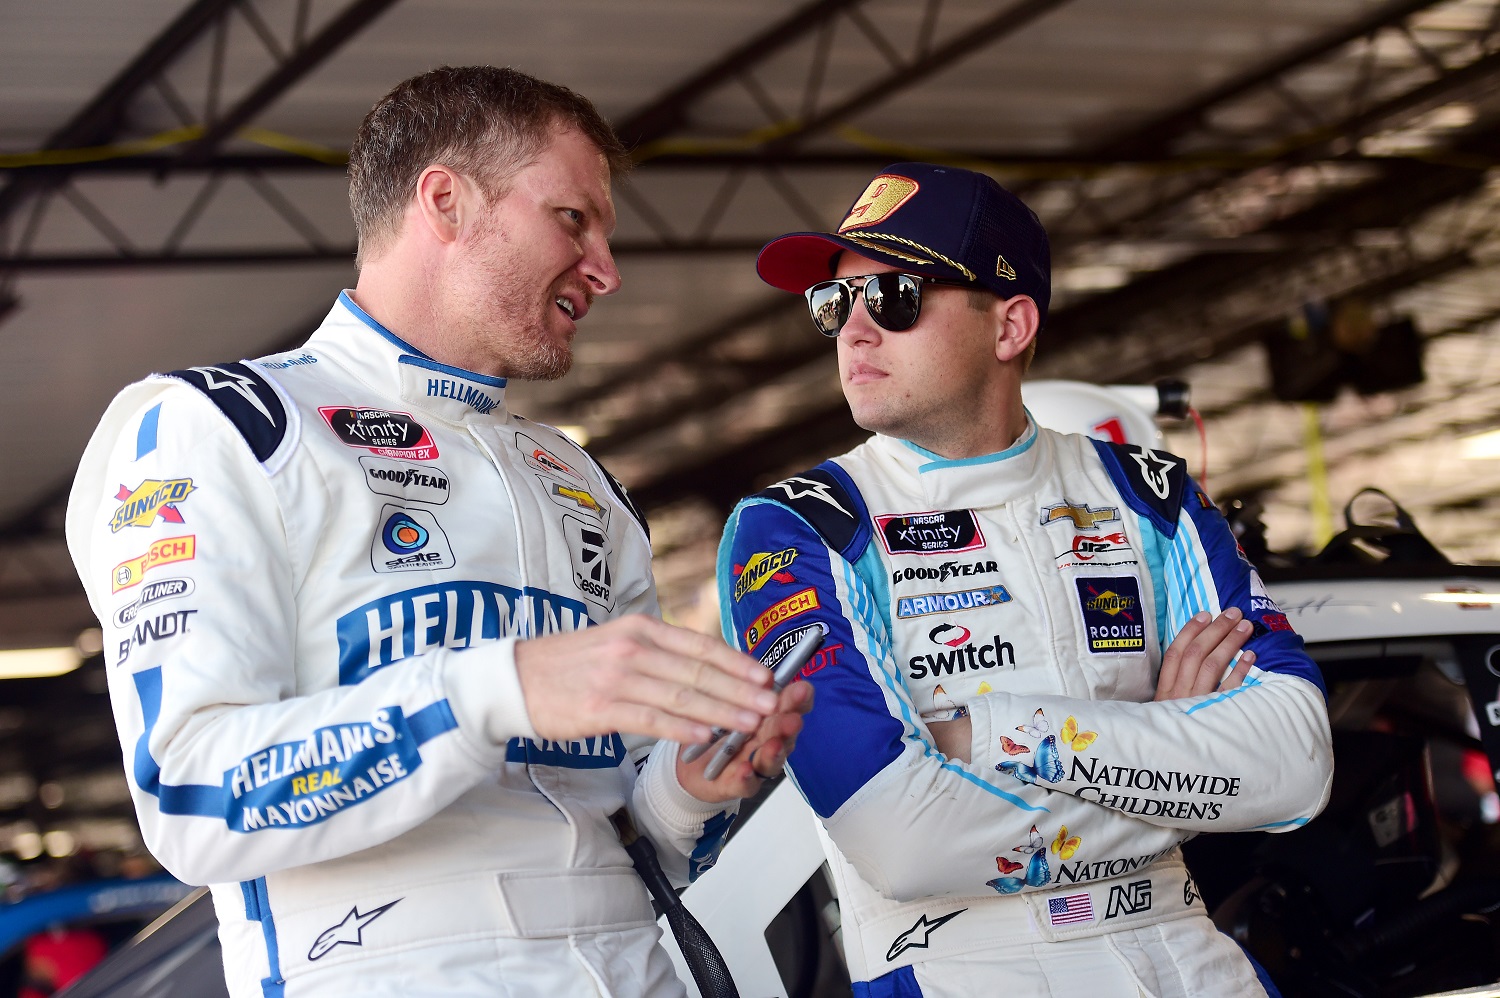 Dale Earnhardt Jr.’s Take on Daniel Hemric Spinning the No. 9 Chevy Doesn’t Jibe With Noah Gragson’s Explanation